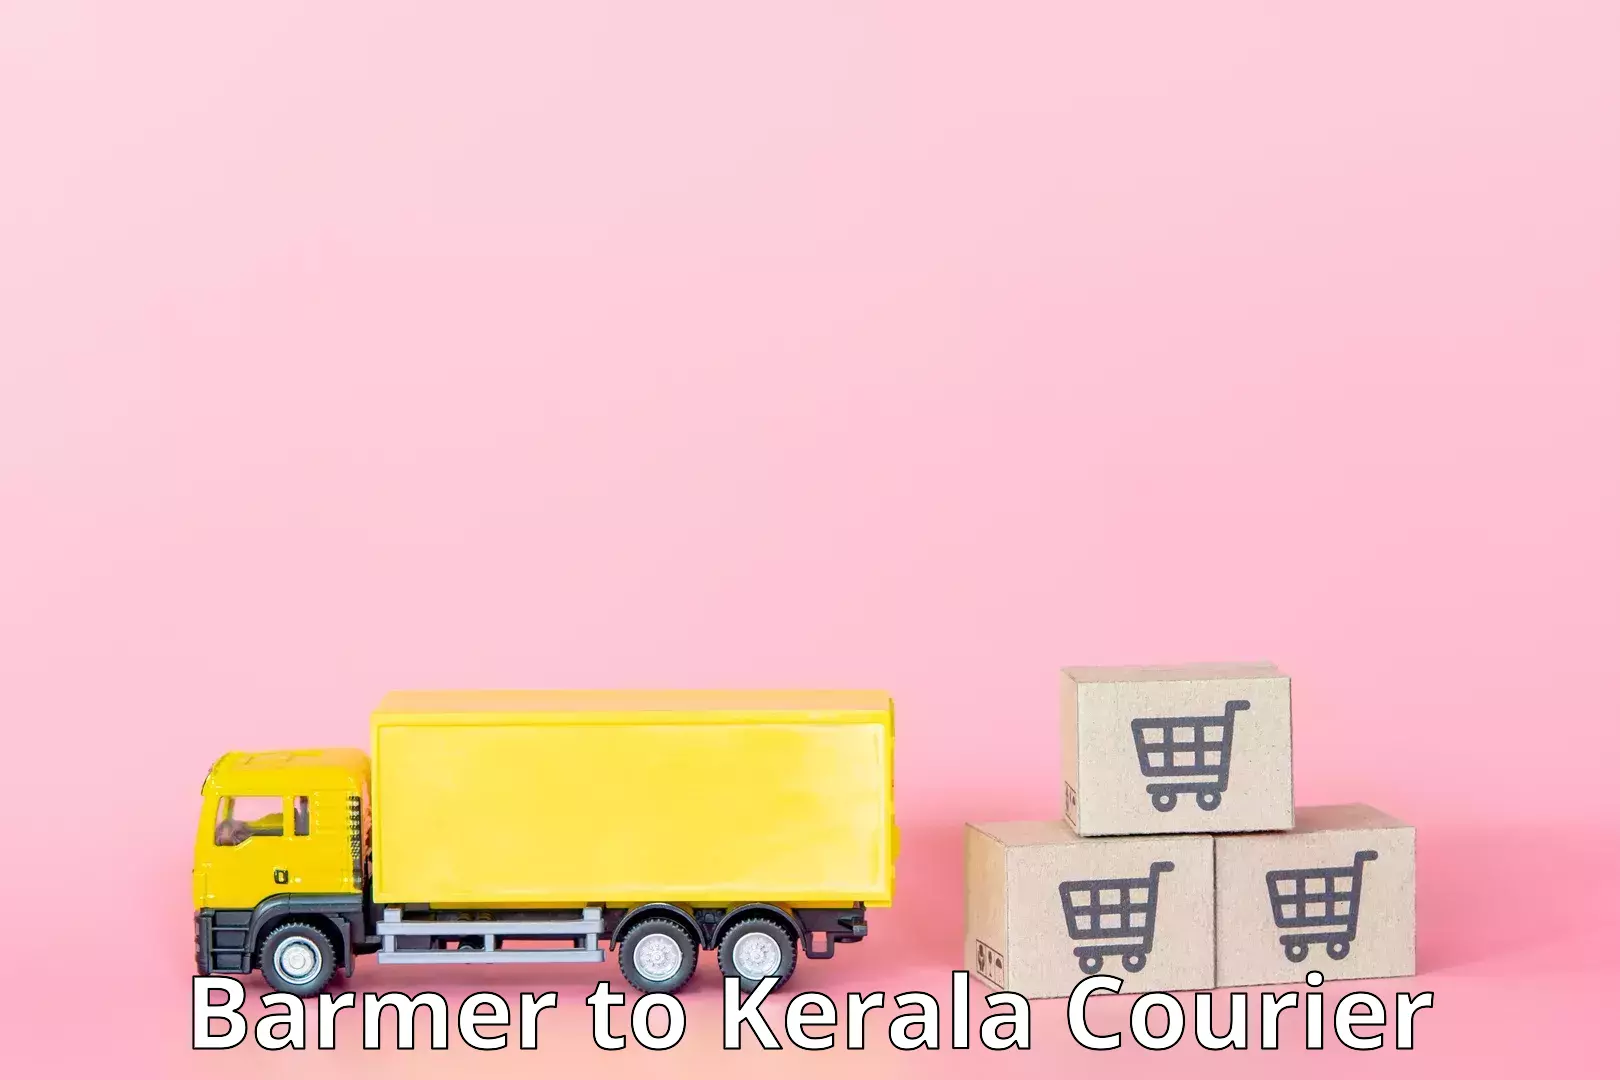 Multi-national courier services Barmer to Kanhangad